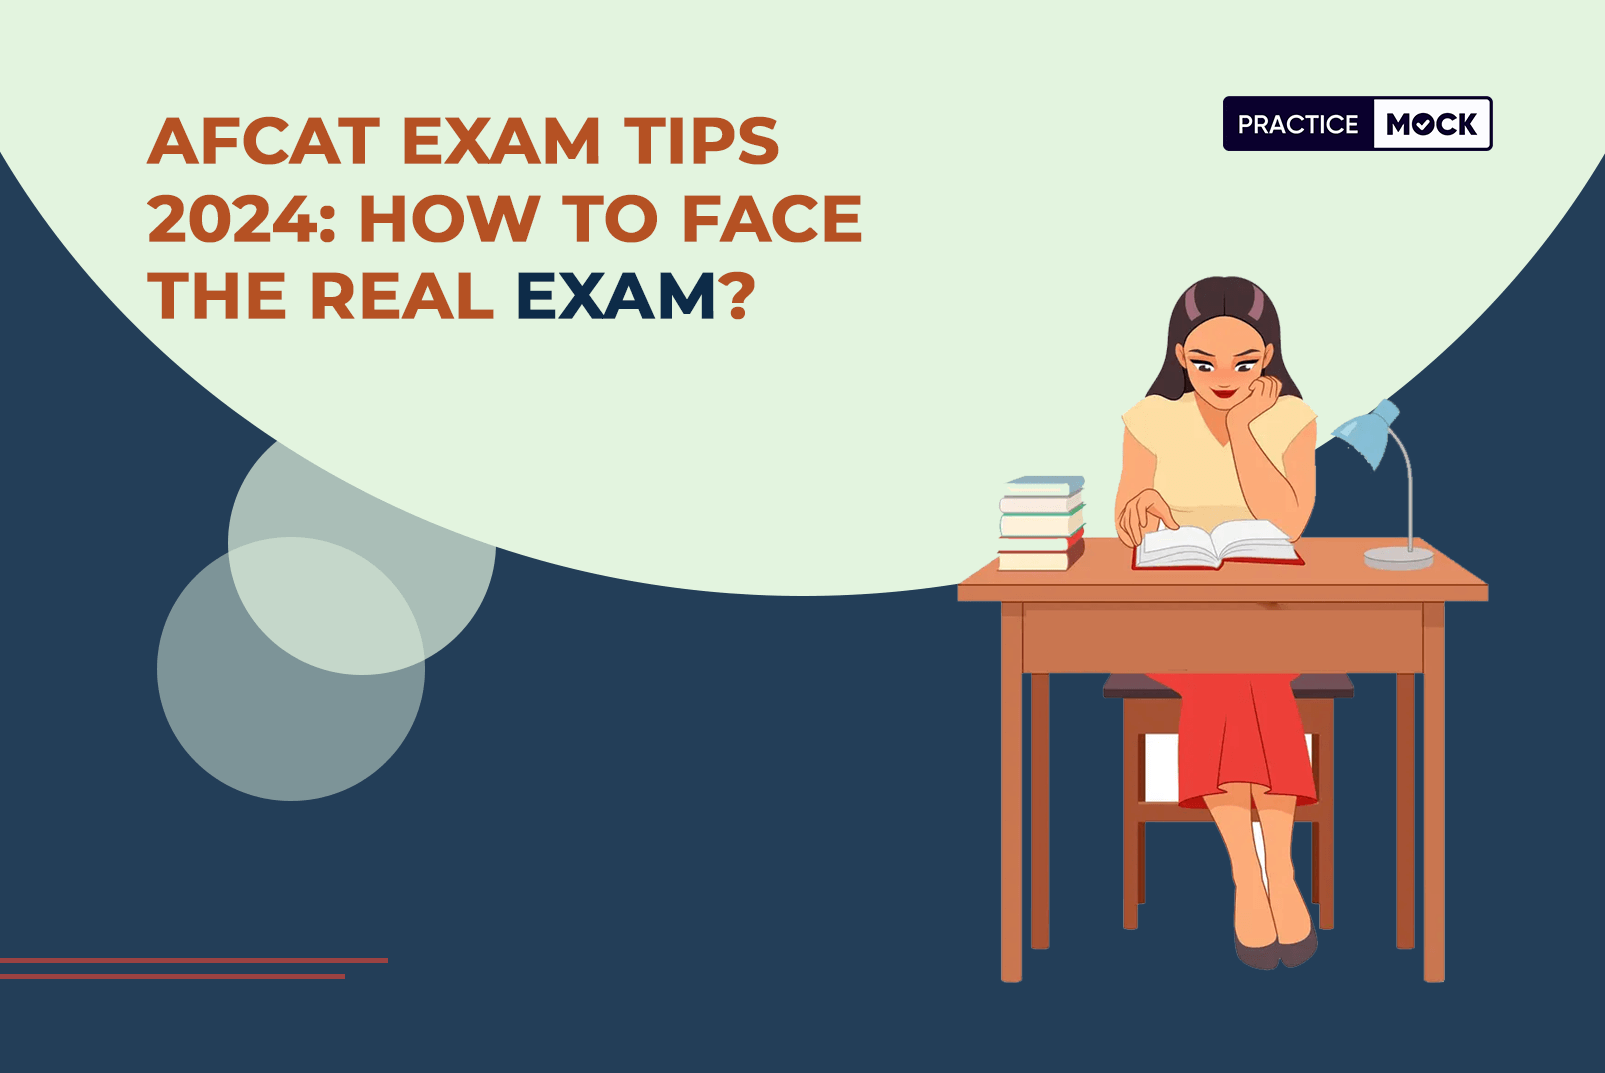 AFCAT Exam Tips 2024 How to Face the Real Exam